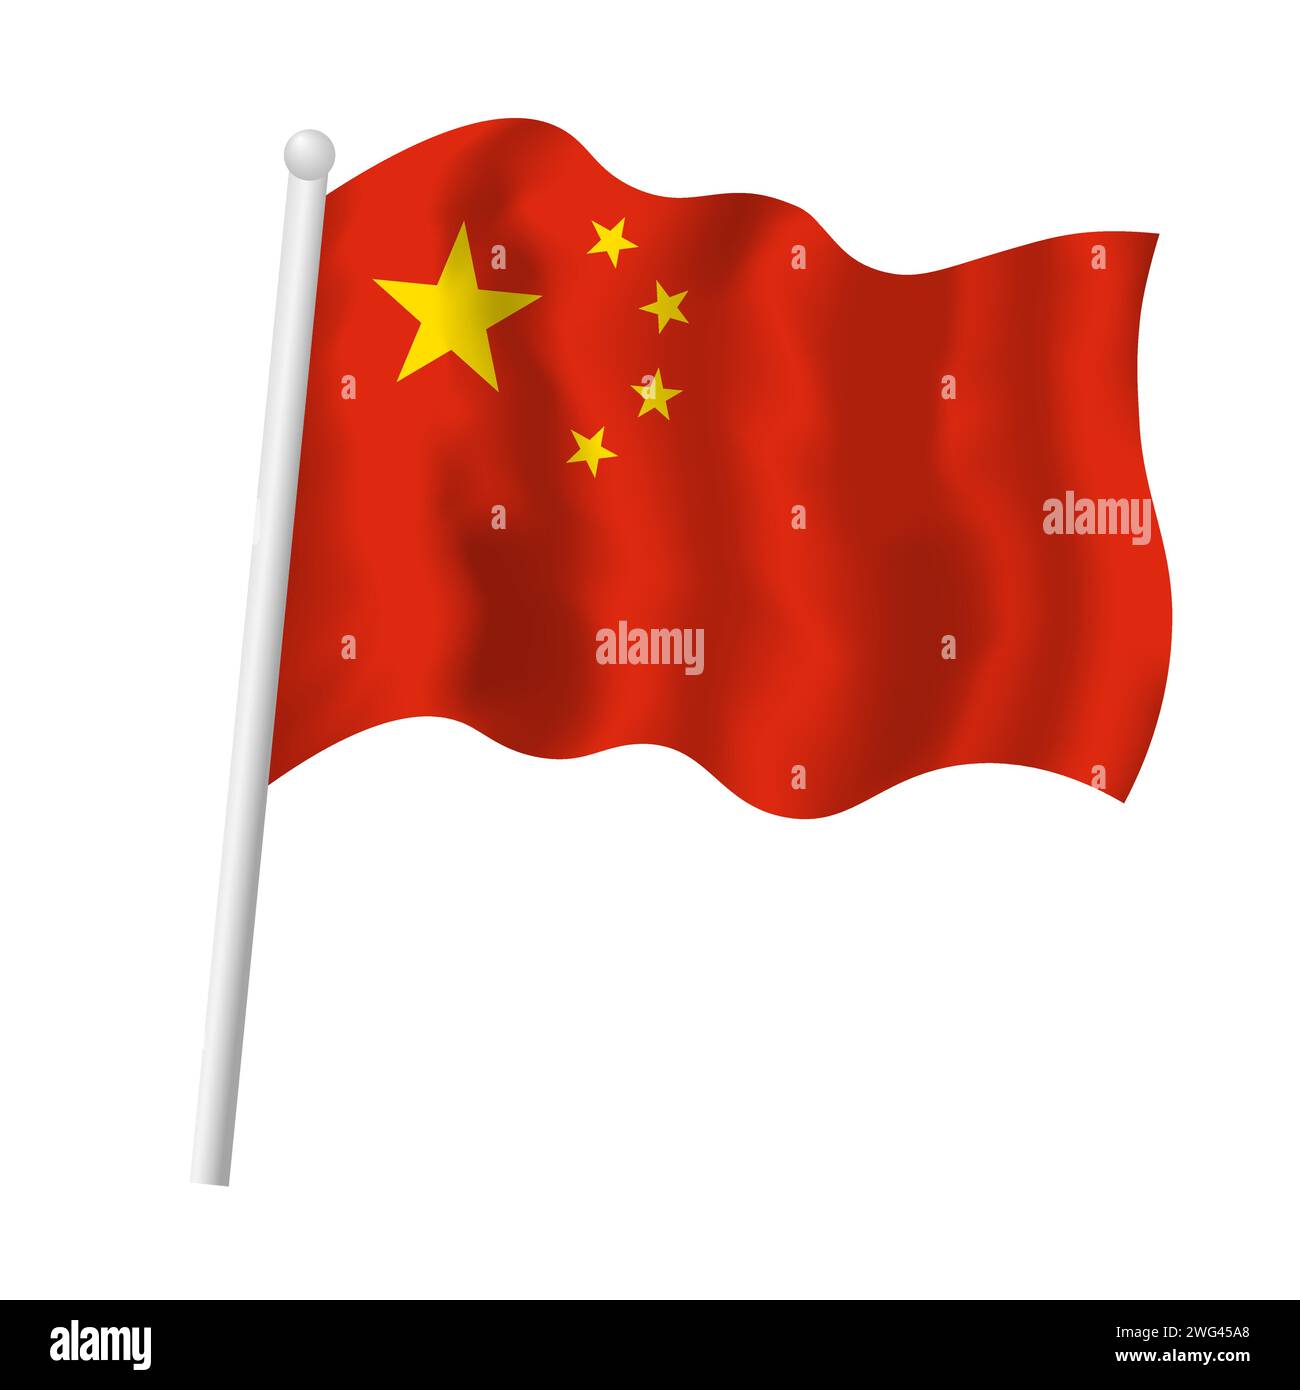 China flag on flagpole waving in wind. Vector isolated illustration of Chinese flag yellow stars red background. People's Republic of China symbol Stock Vector